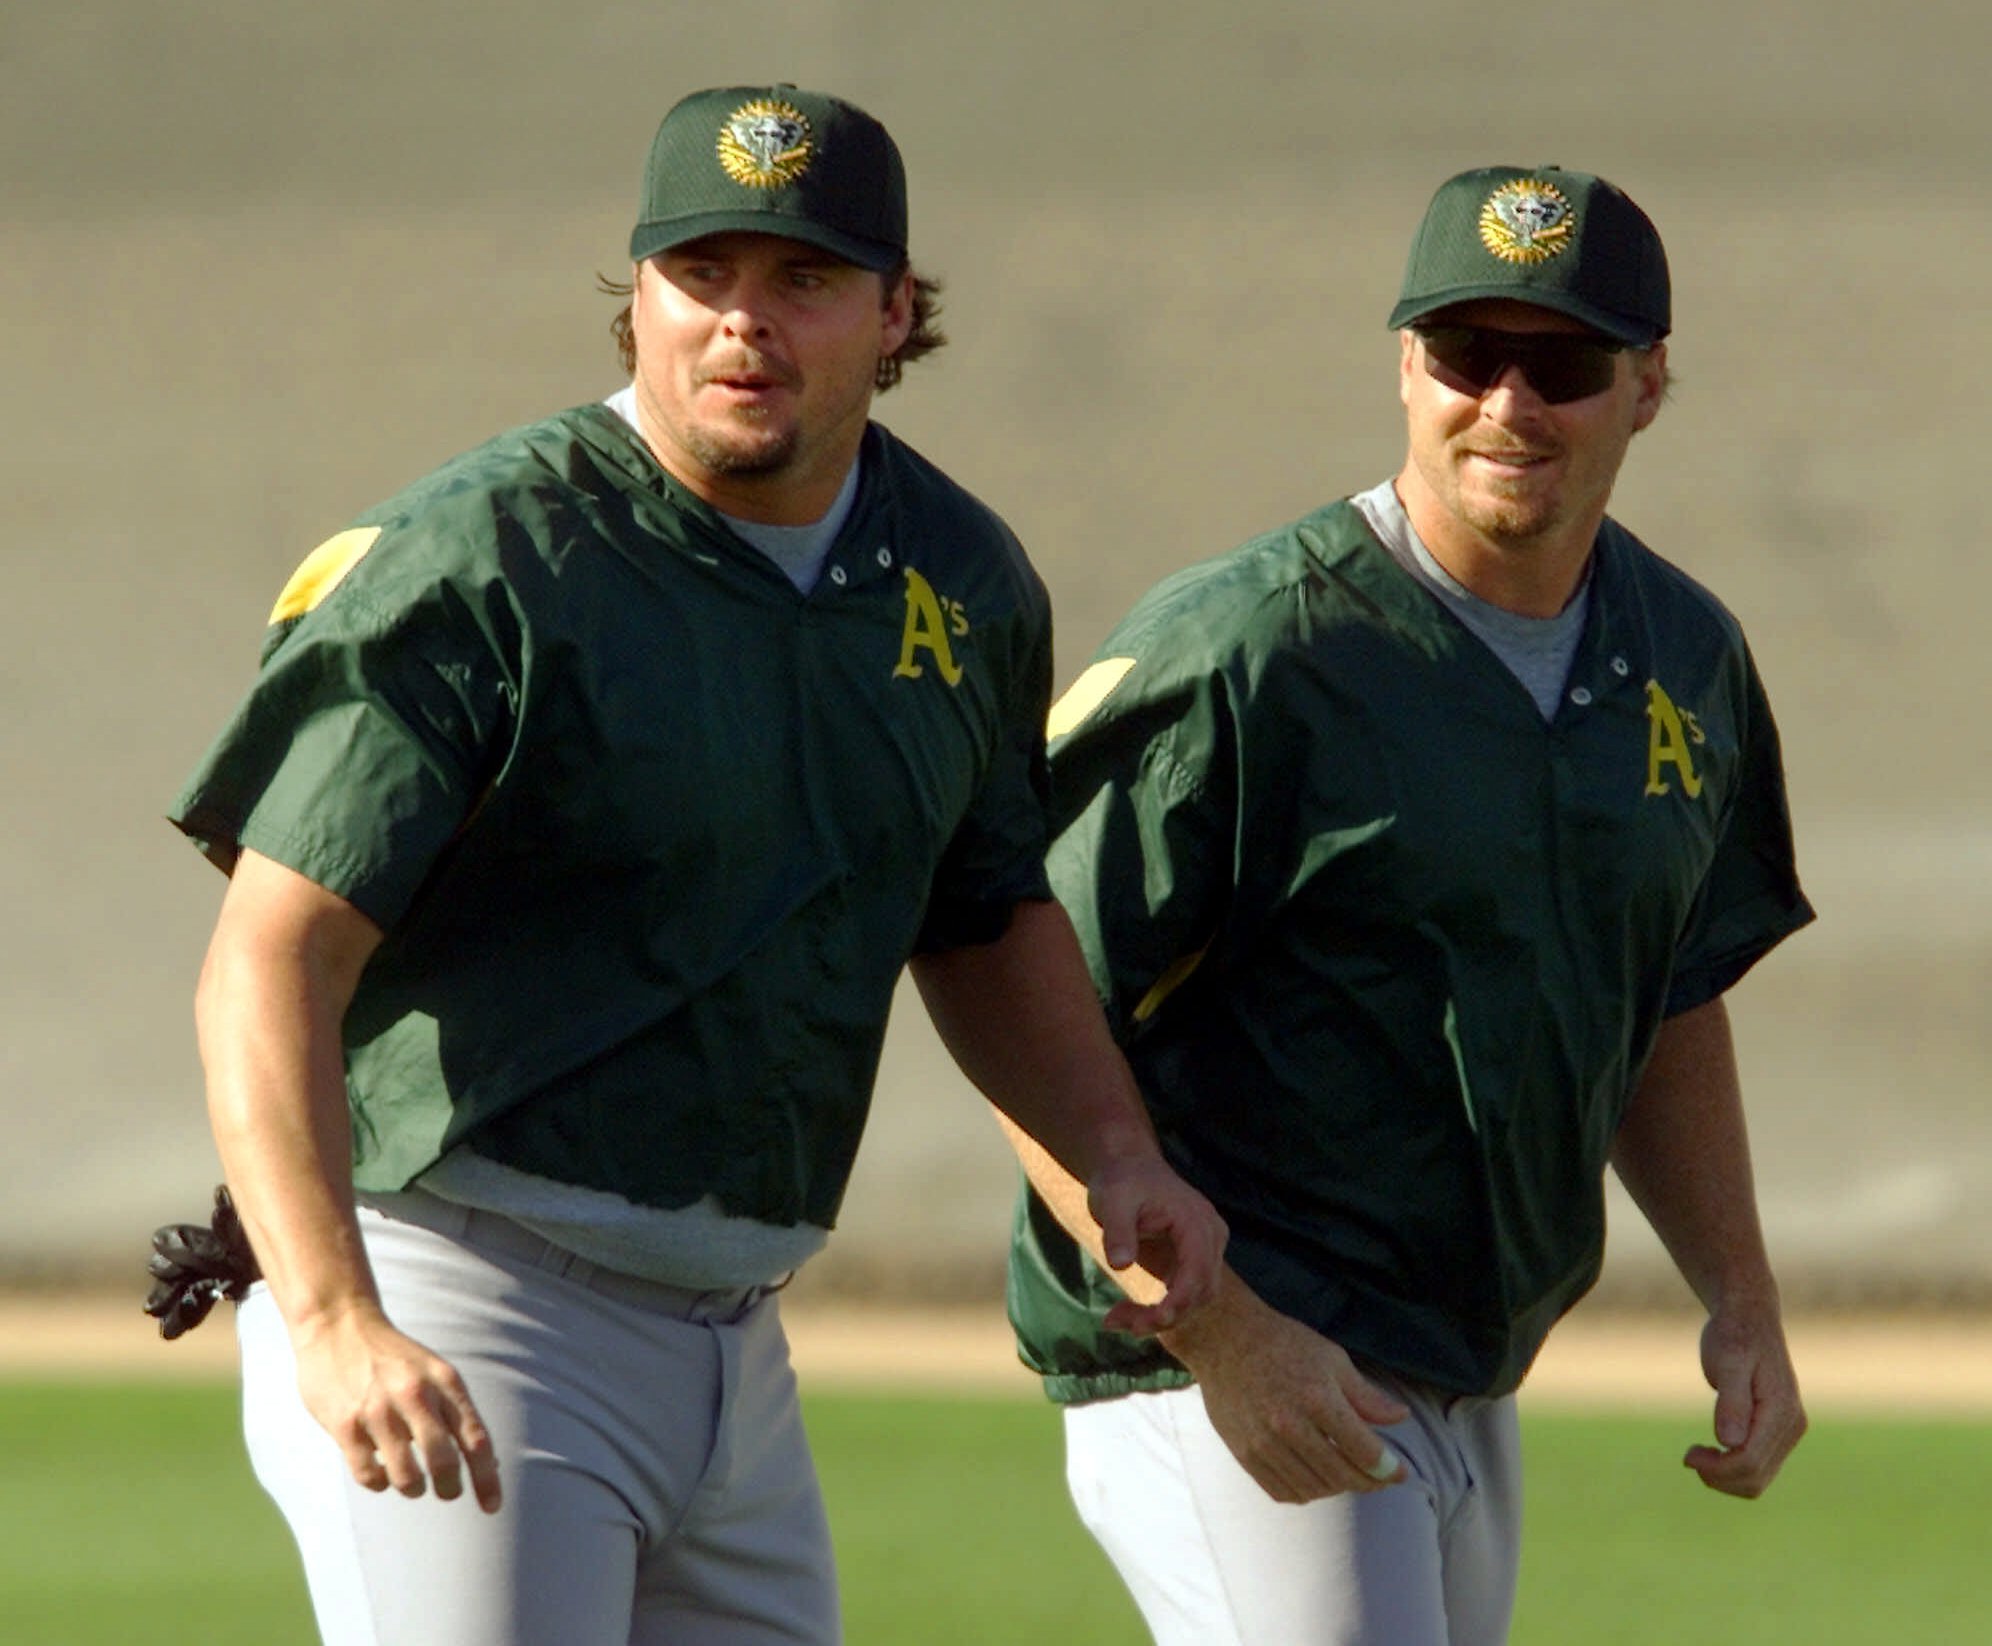 Former A's outfielder Jeremy Giambi dies at age 47